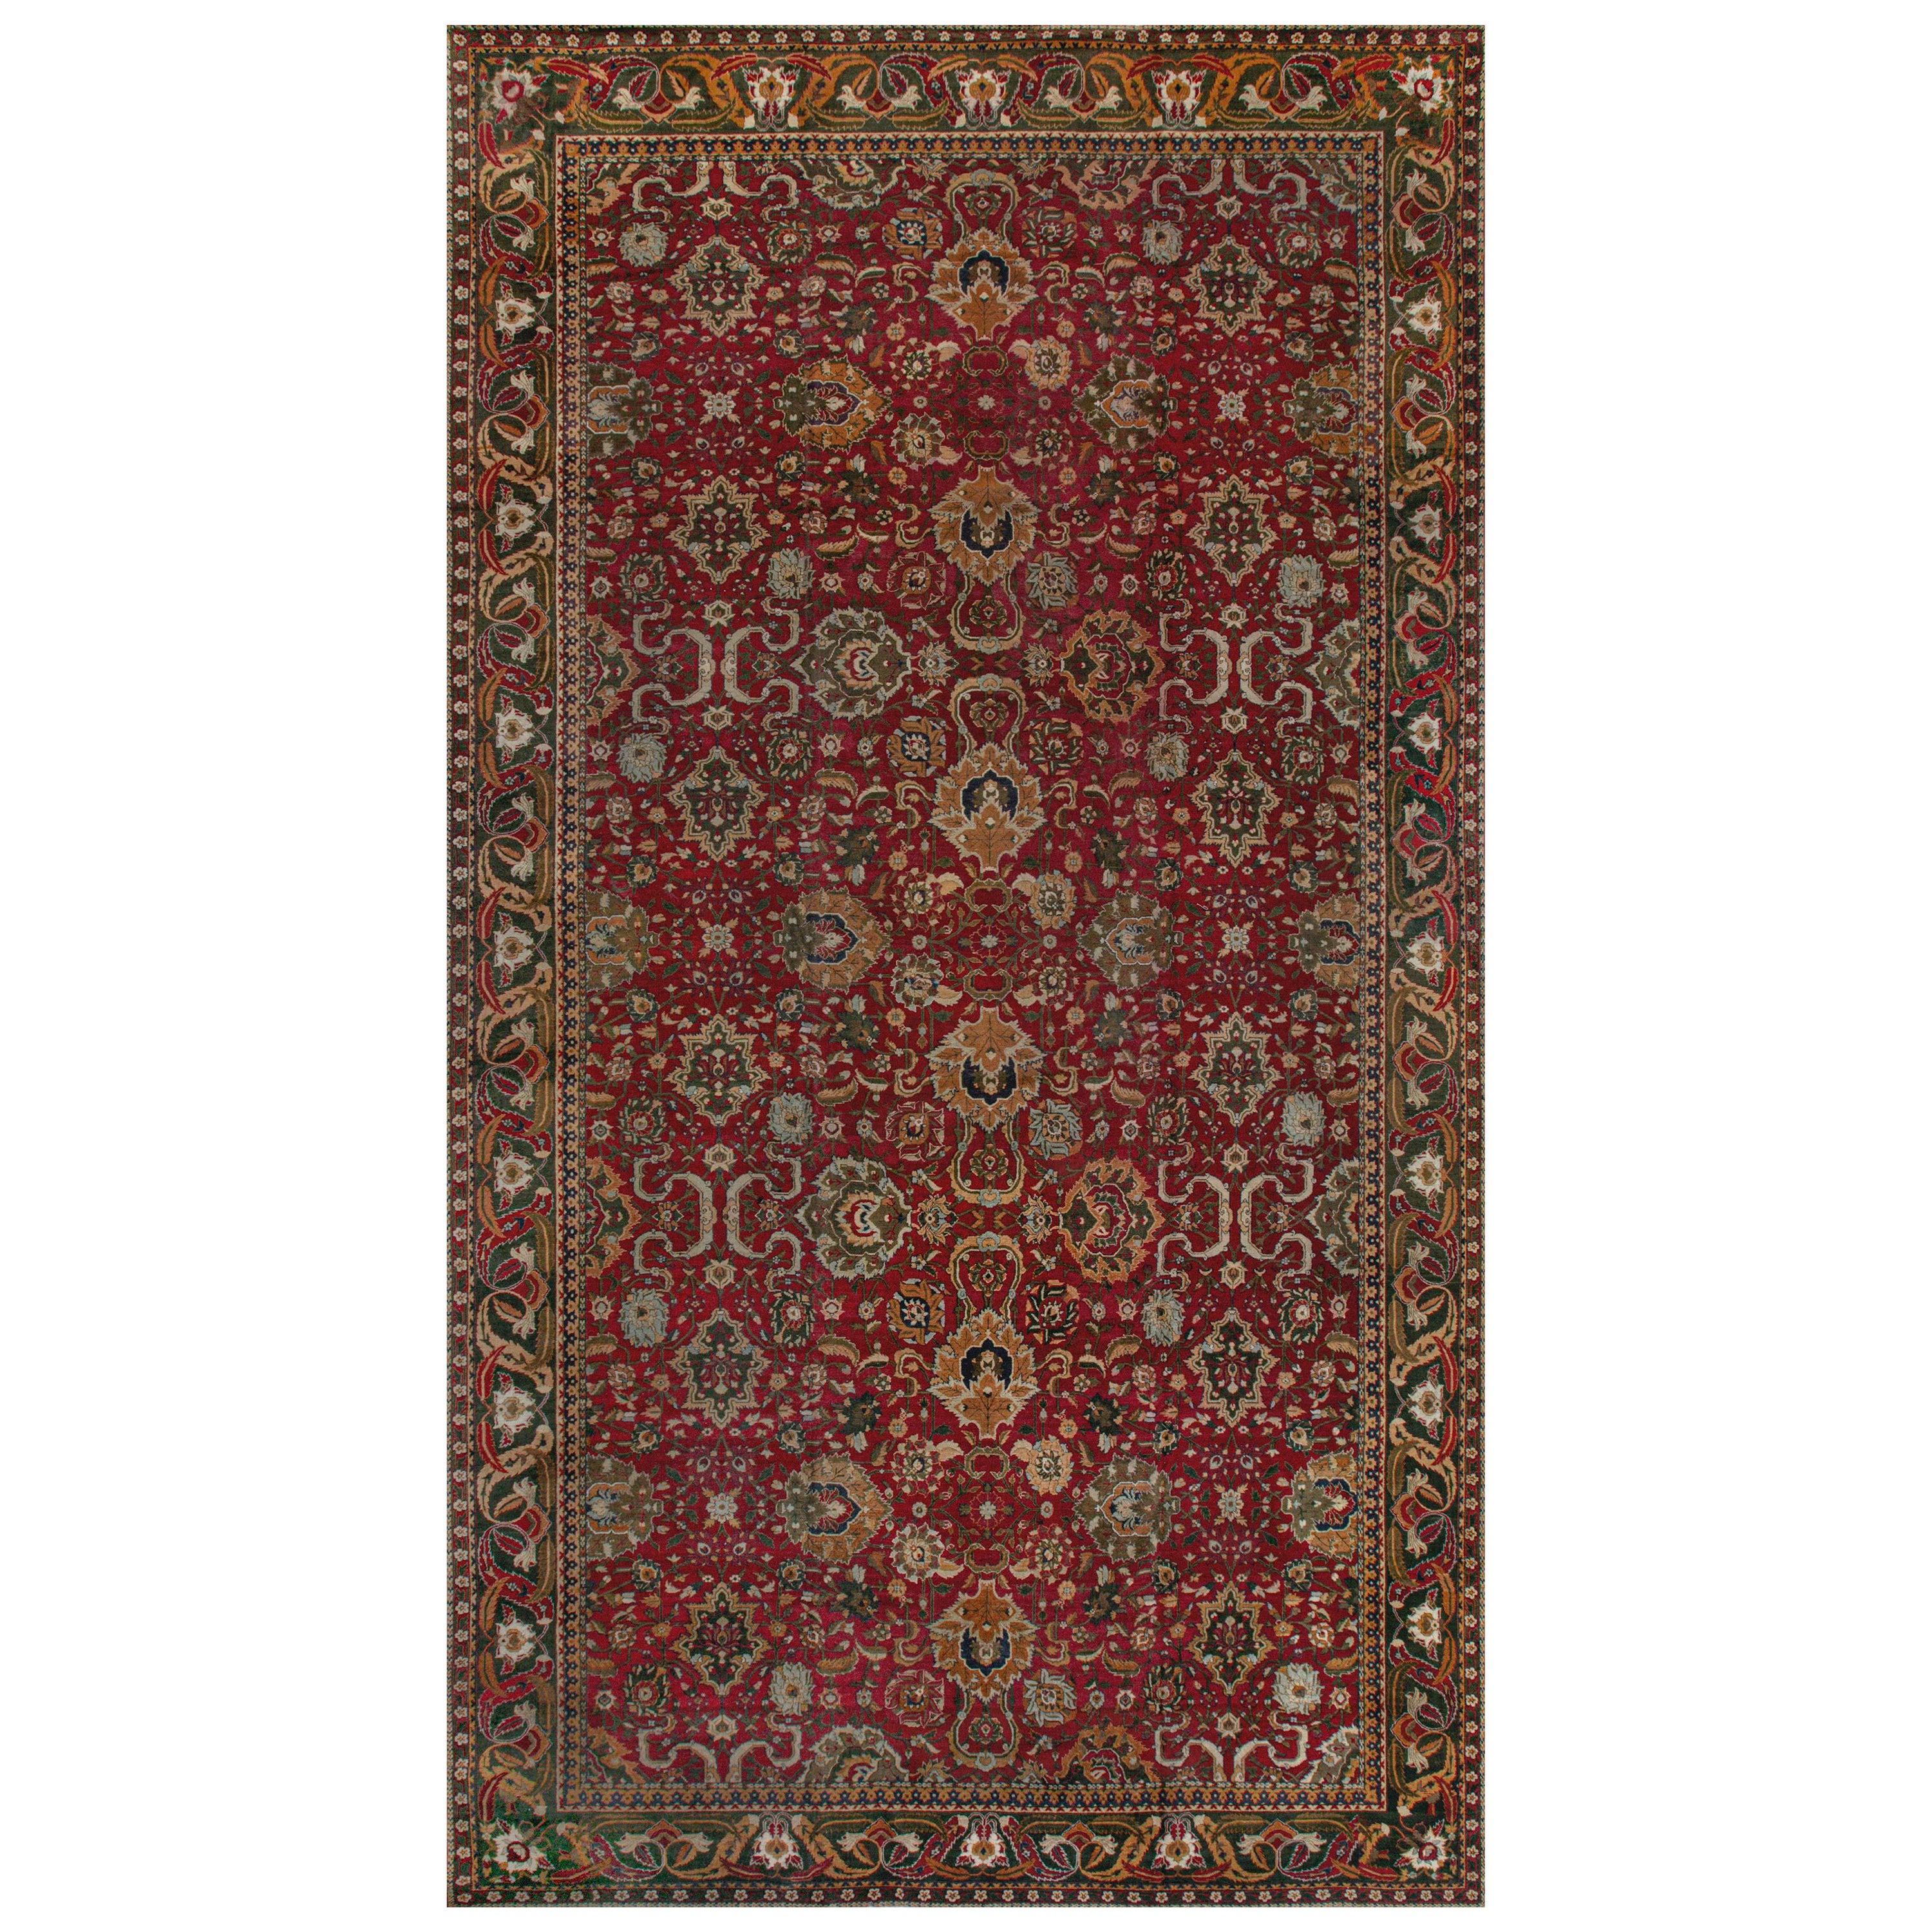 Authentic Indian Agra Bold Red Handmade Wool Carpet For Sale